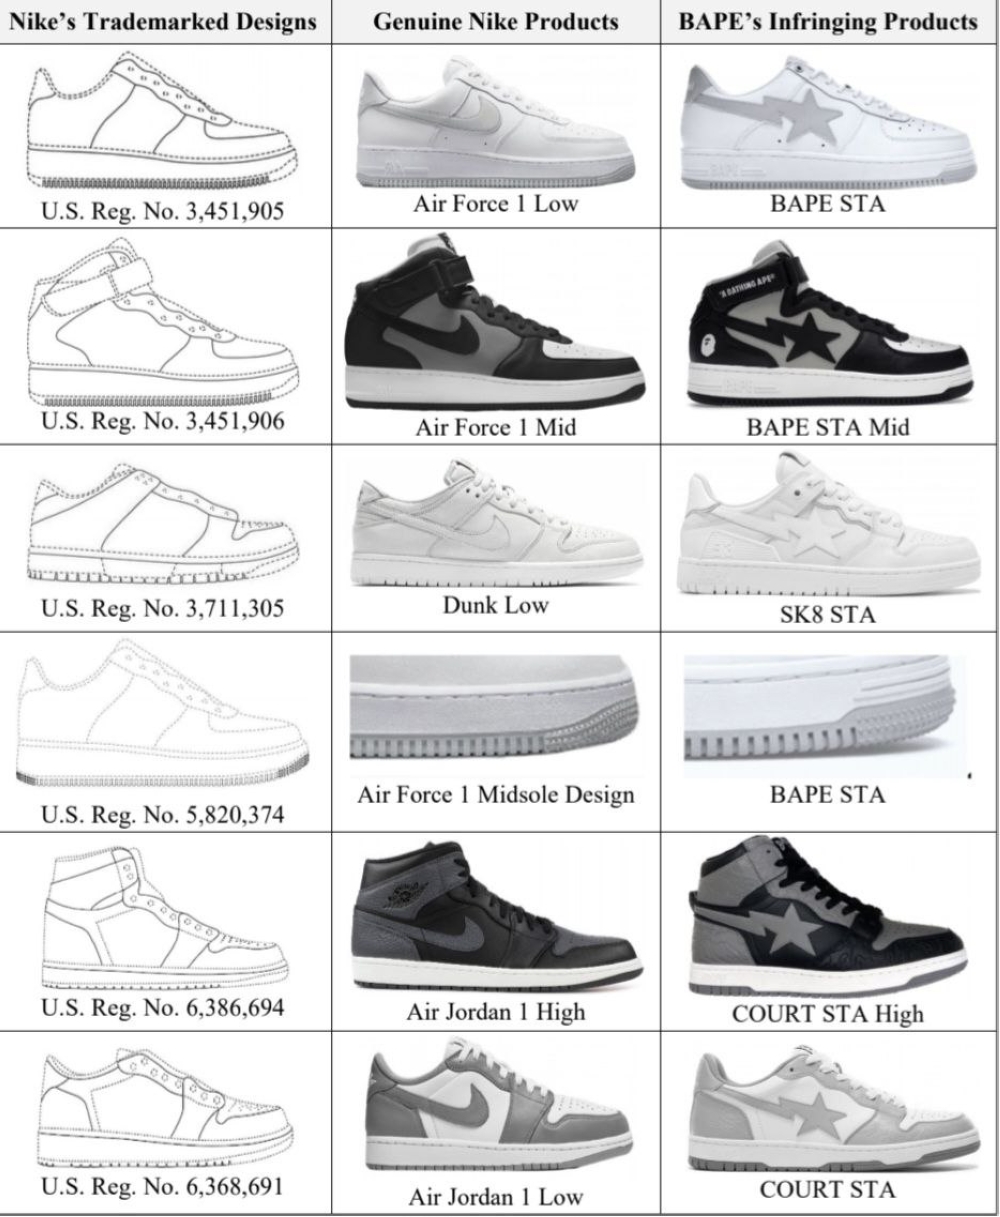 A screenshot of BAPE's alleged infringement designs from the lawsuit. — Screenshot from Nike Inc V. USAPE LLC lawsuit.